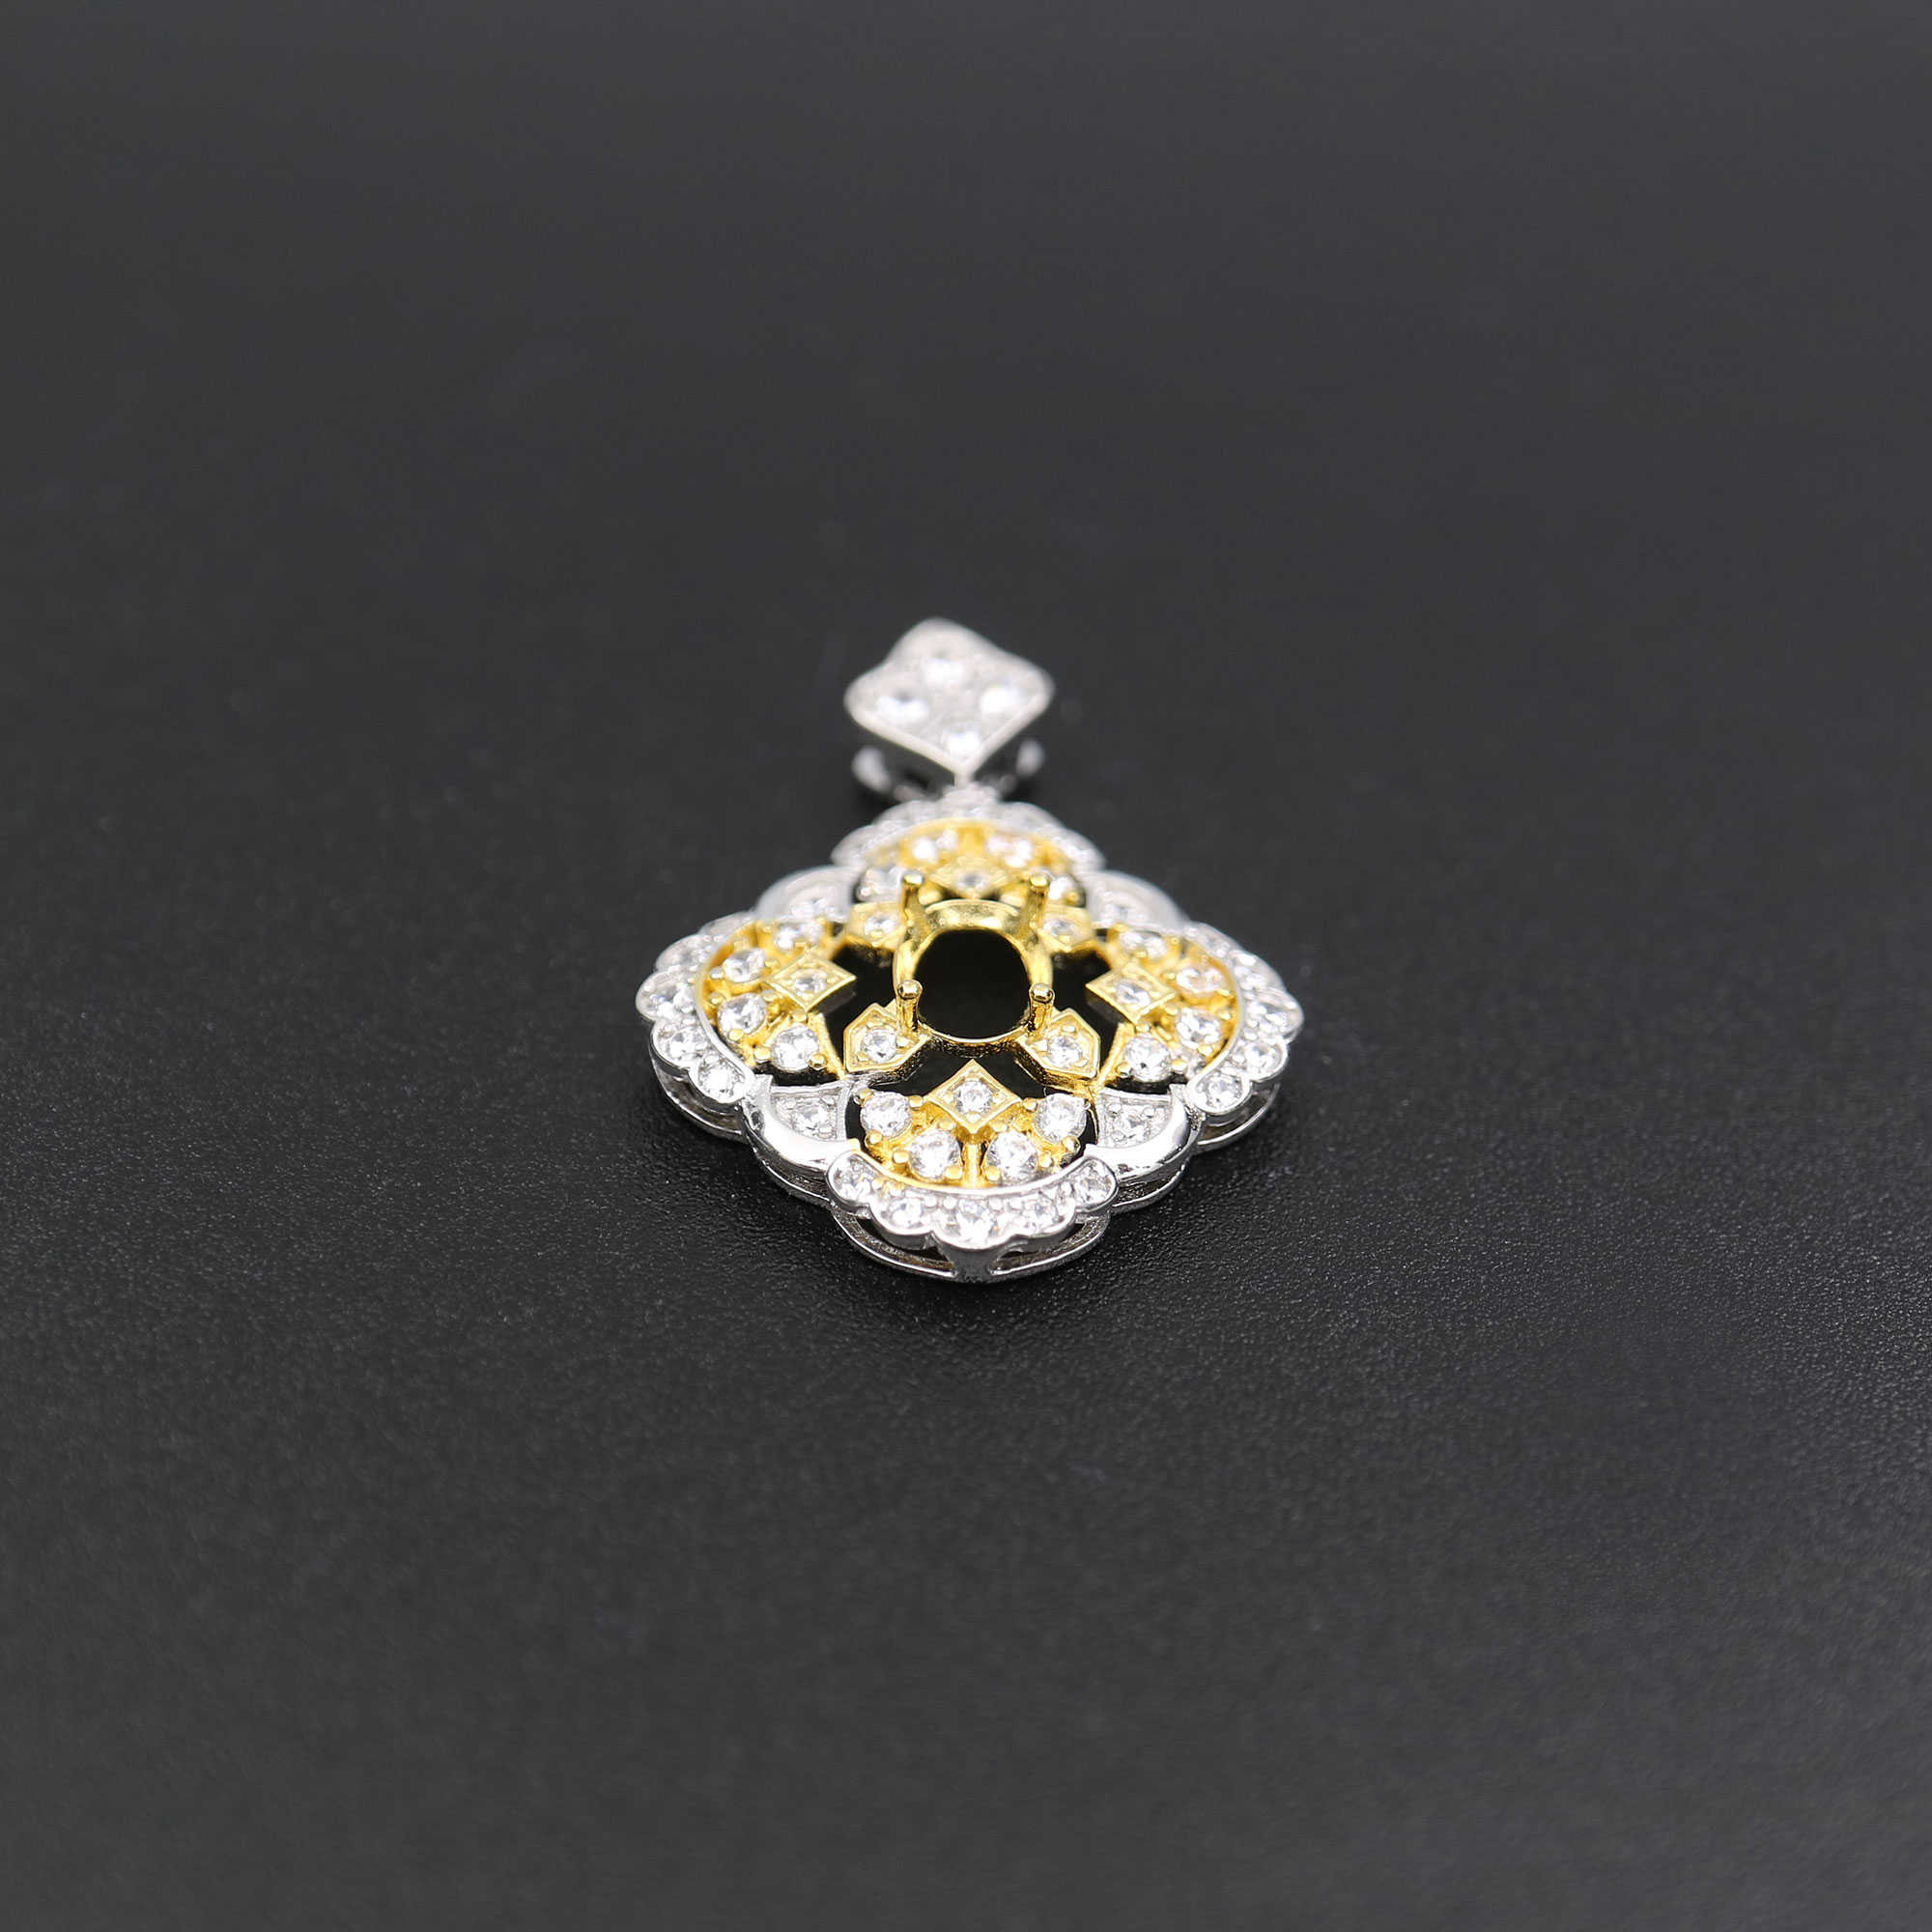 1Pcs 5X7MM Oval Bezel Gold Plated Pave Flower Vintage Style Solid 925 Sterling Silver Pendant Settings DIY Gemstone Jewelry Supplies 1421111 - Click Image to Close